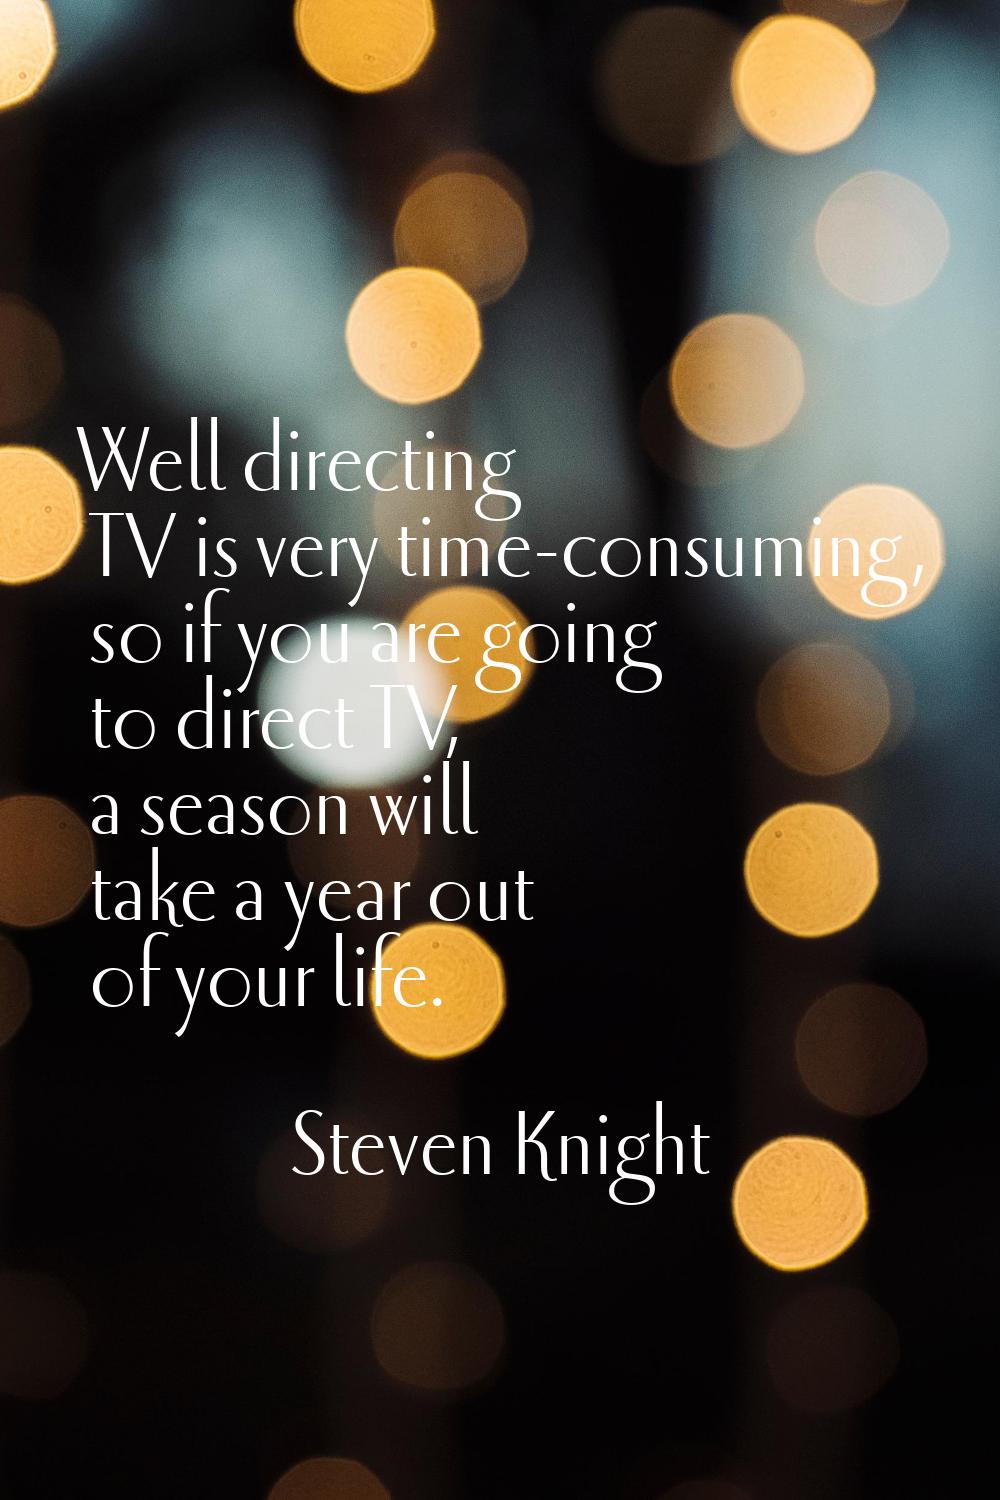 Well directing TV is very time-consuming, so if you are going to direct TV, a season will take a ye